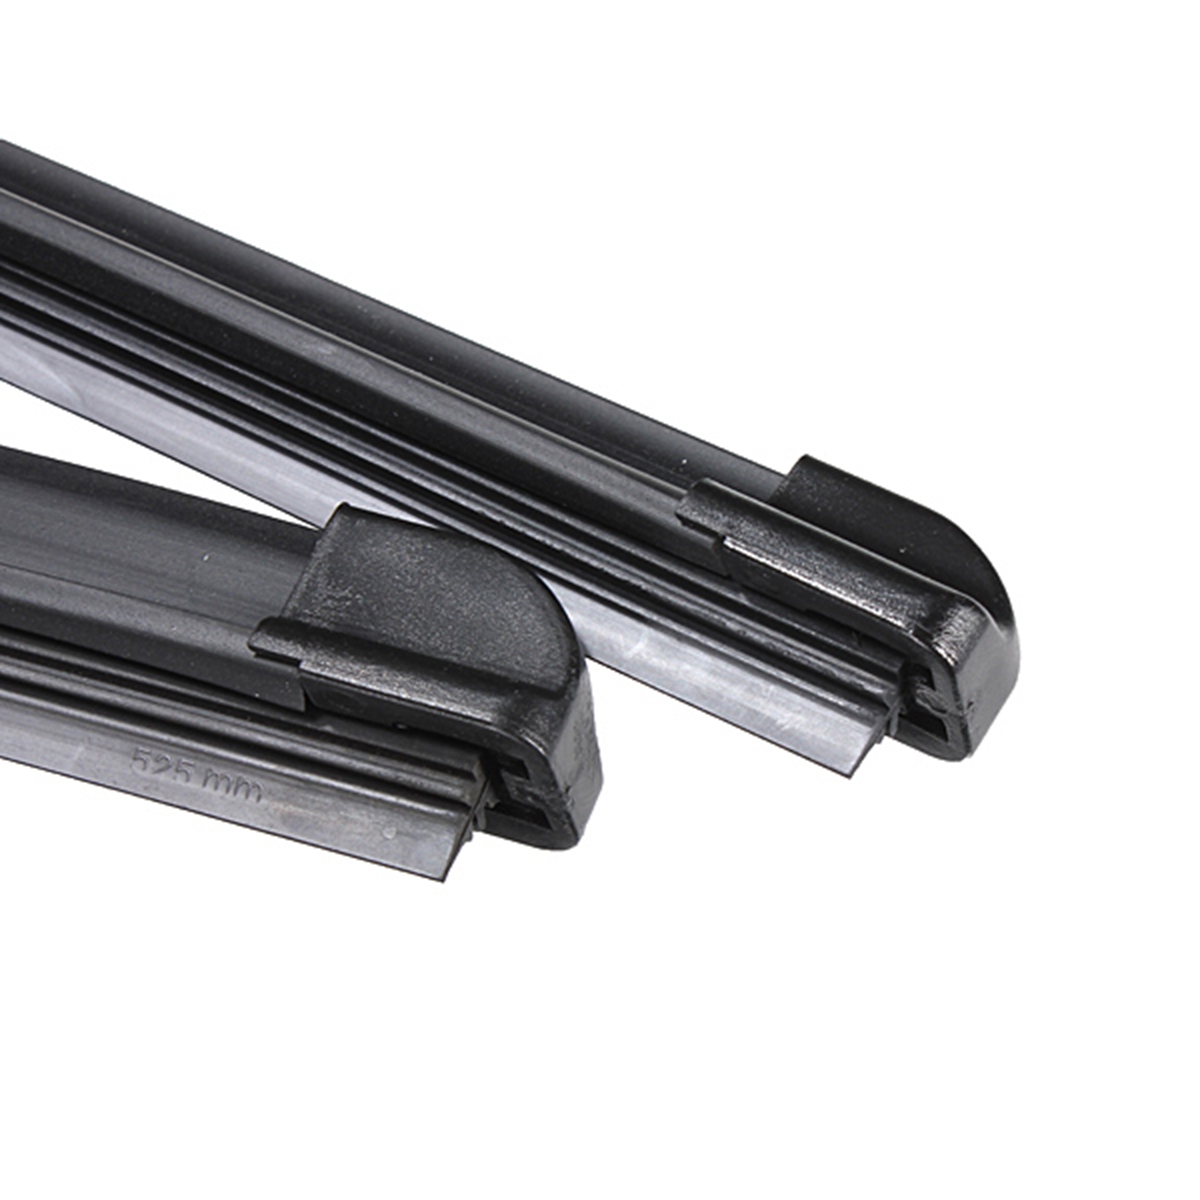 Ford focus windscreen wipers size #8